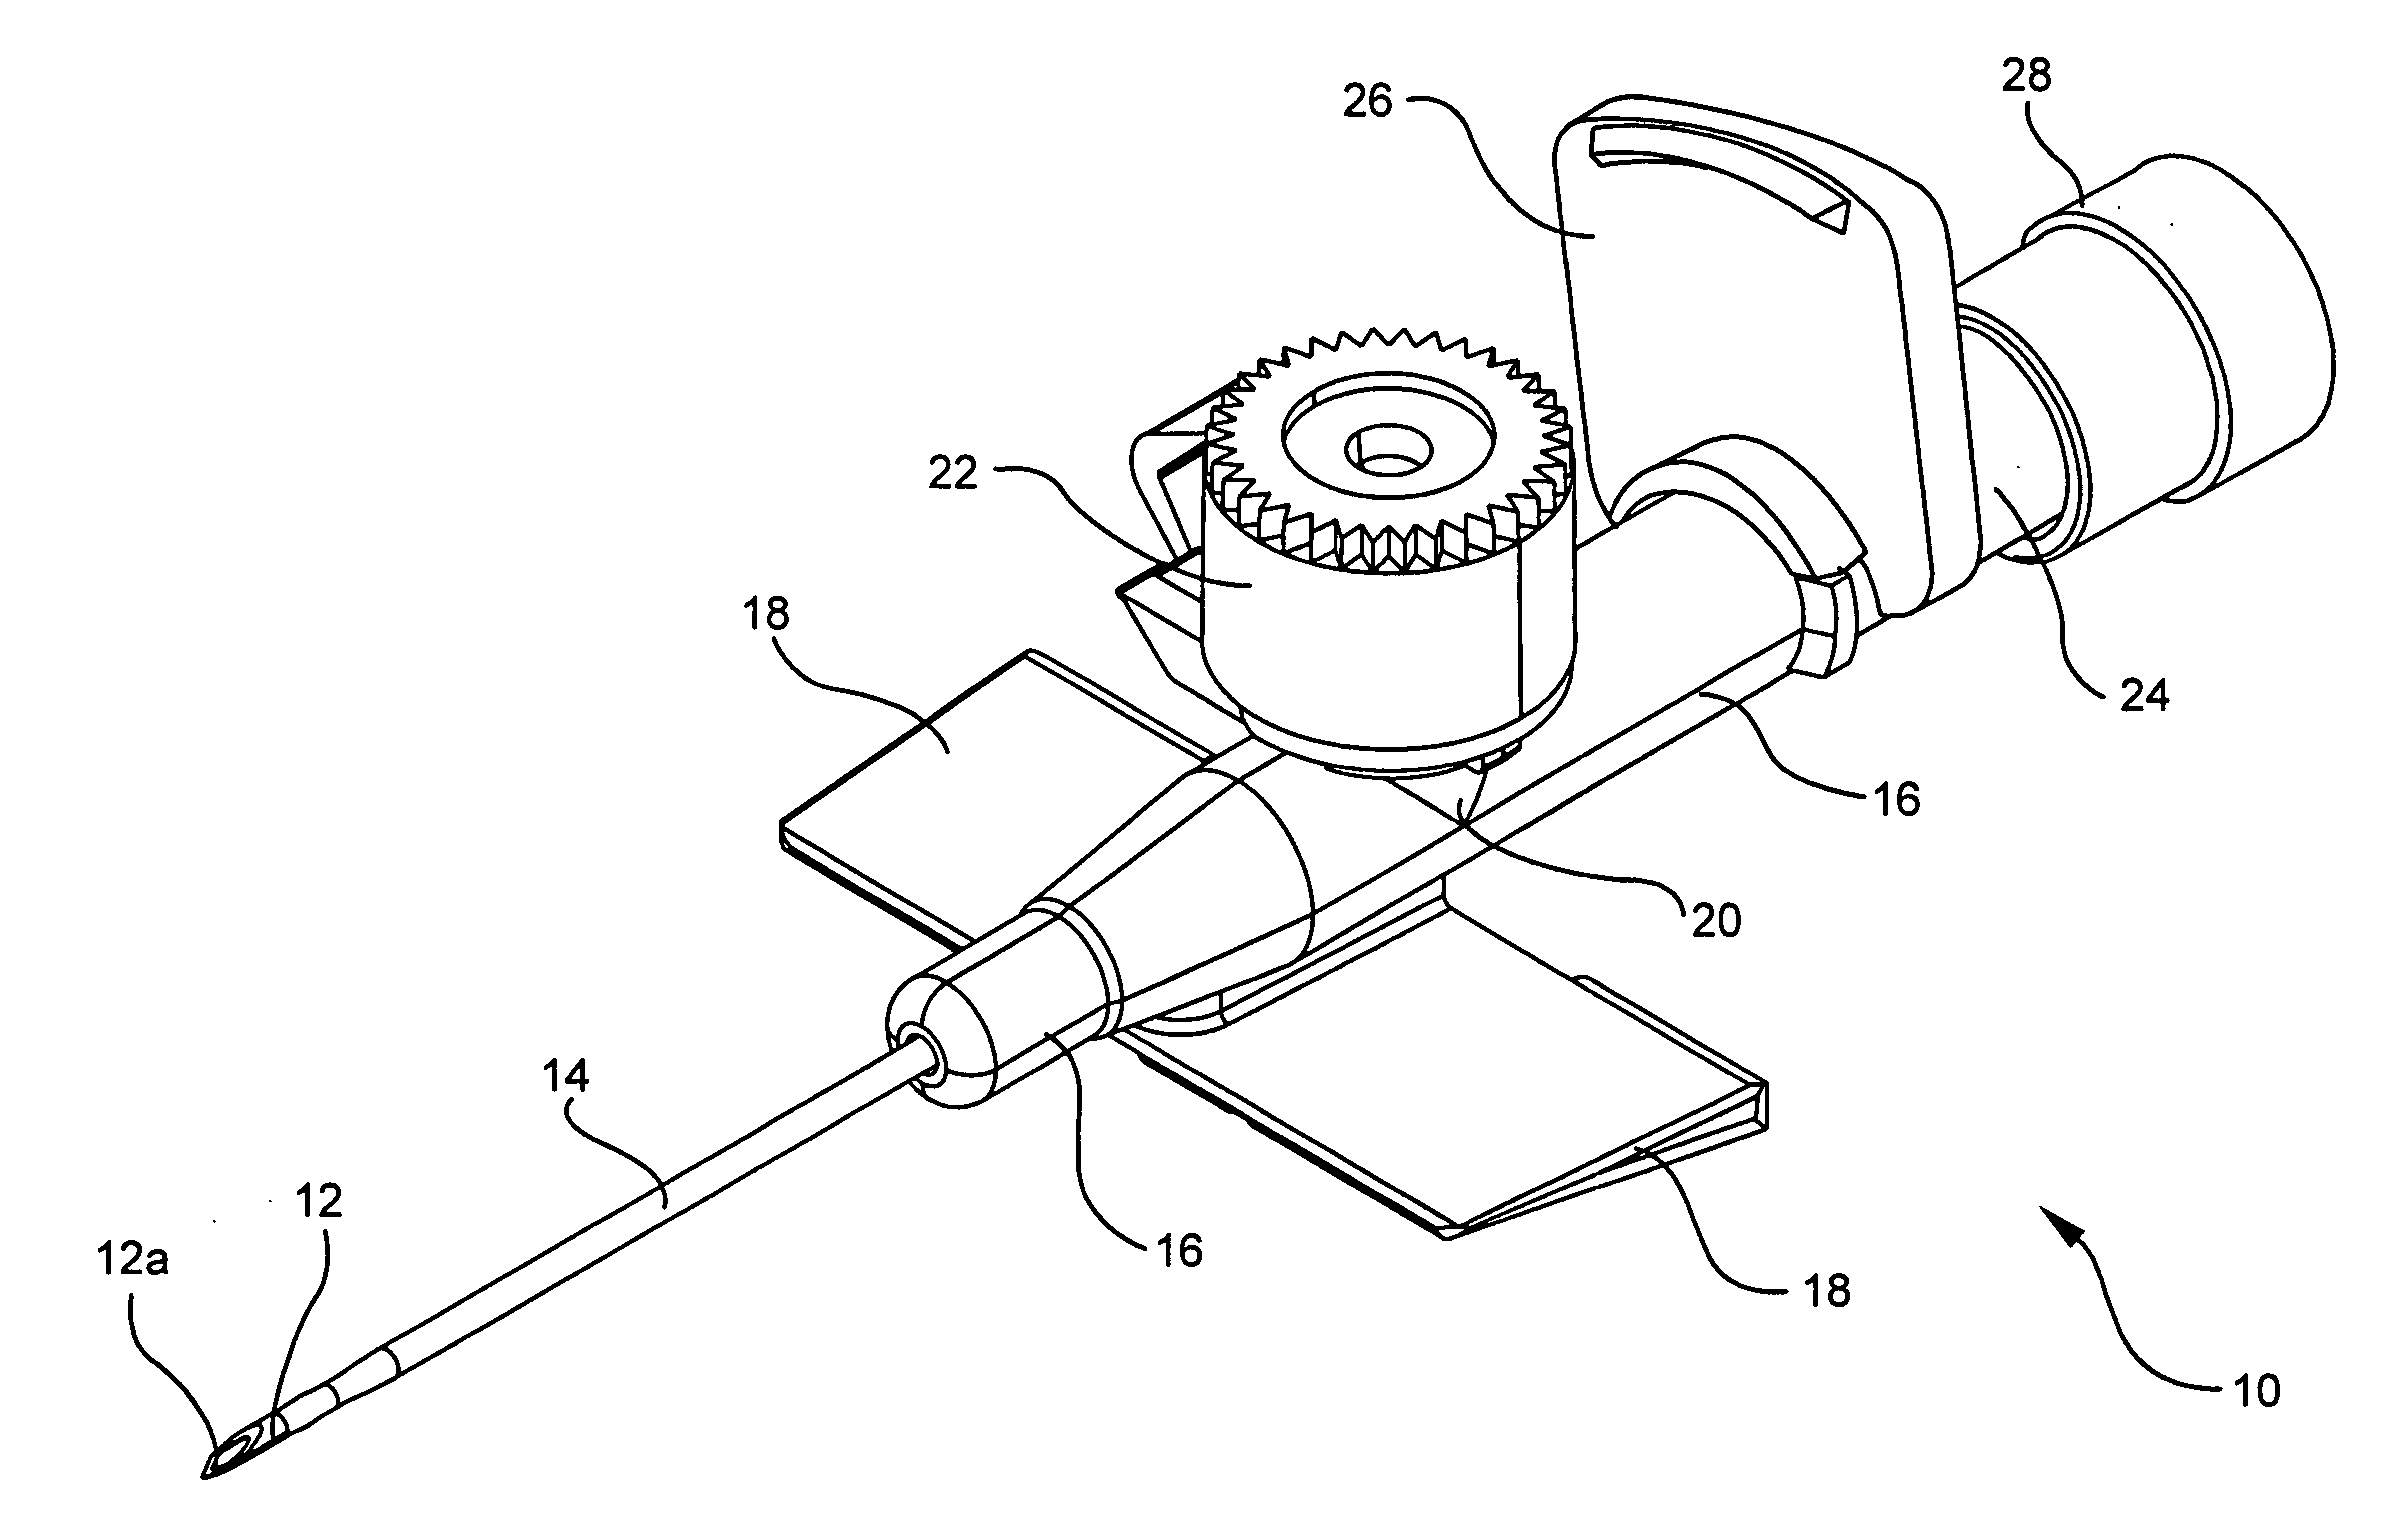 Integrated septum and needle tip shield for a catheter assembly